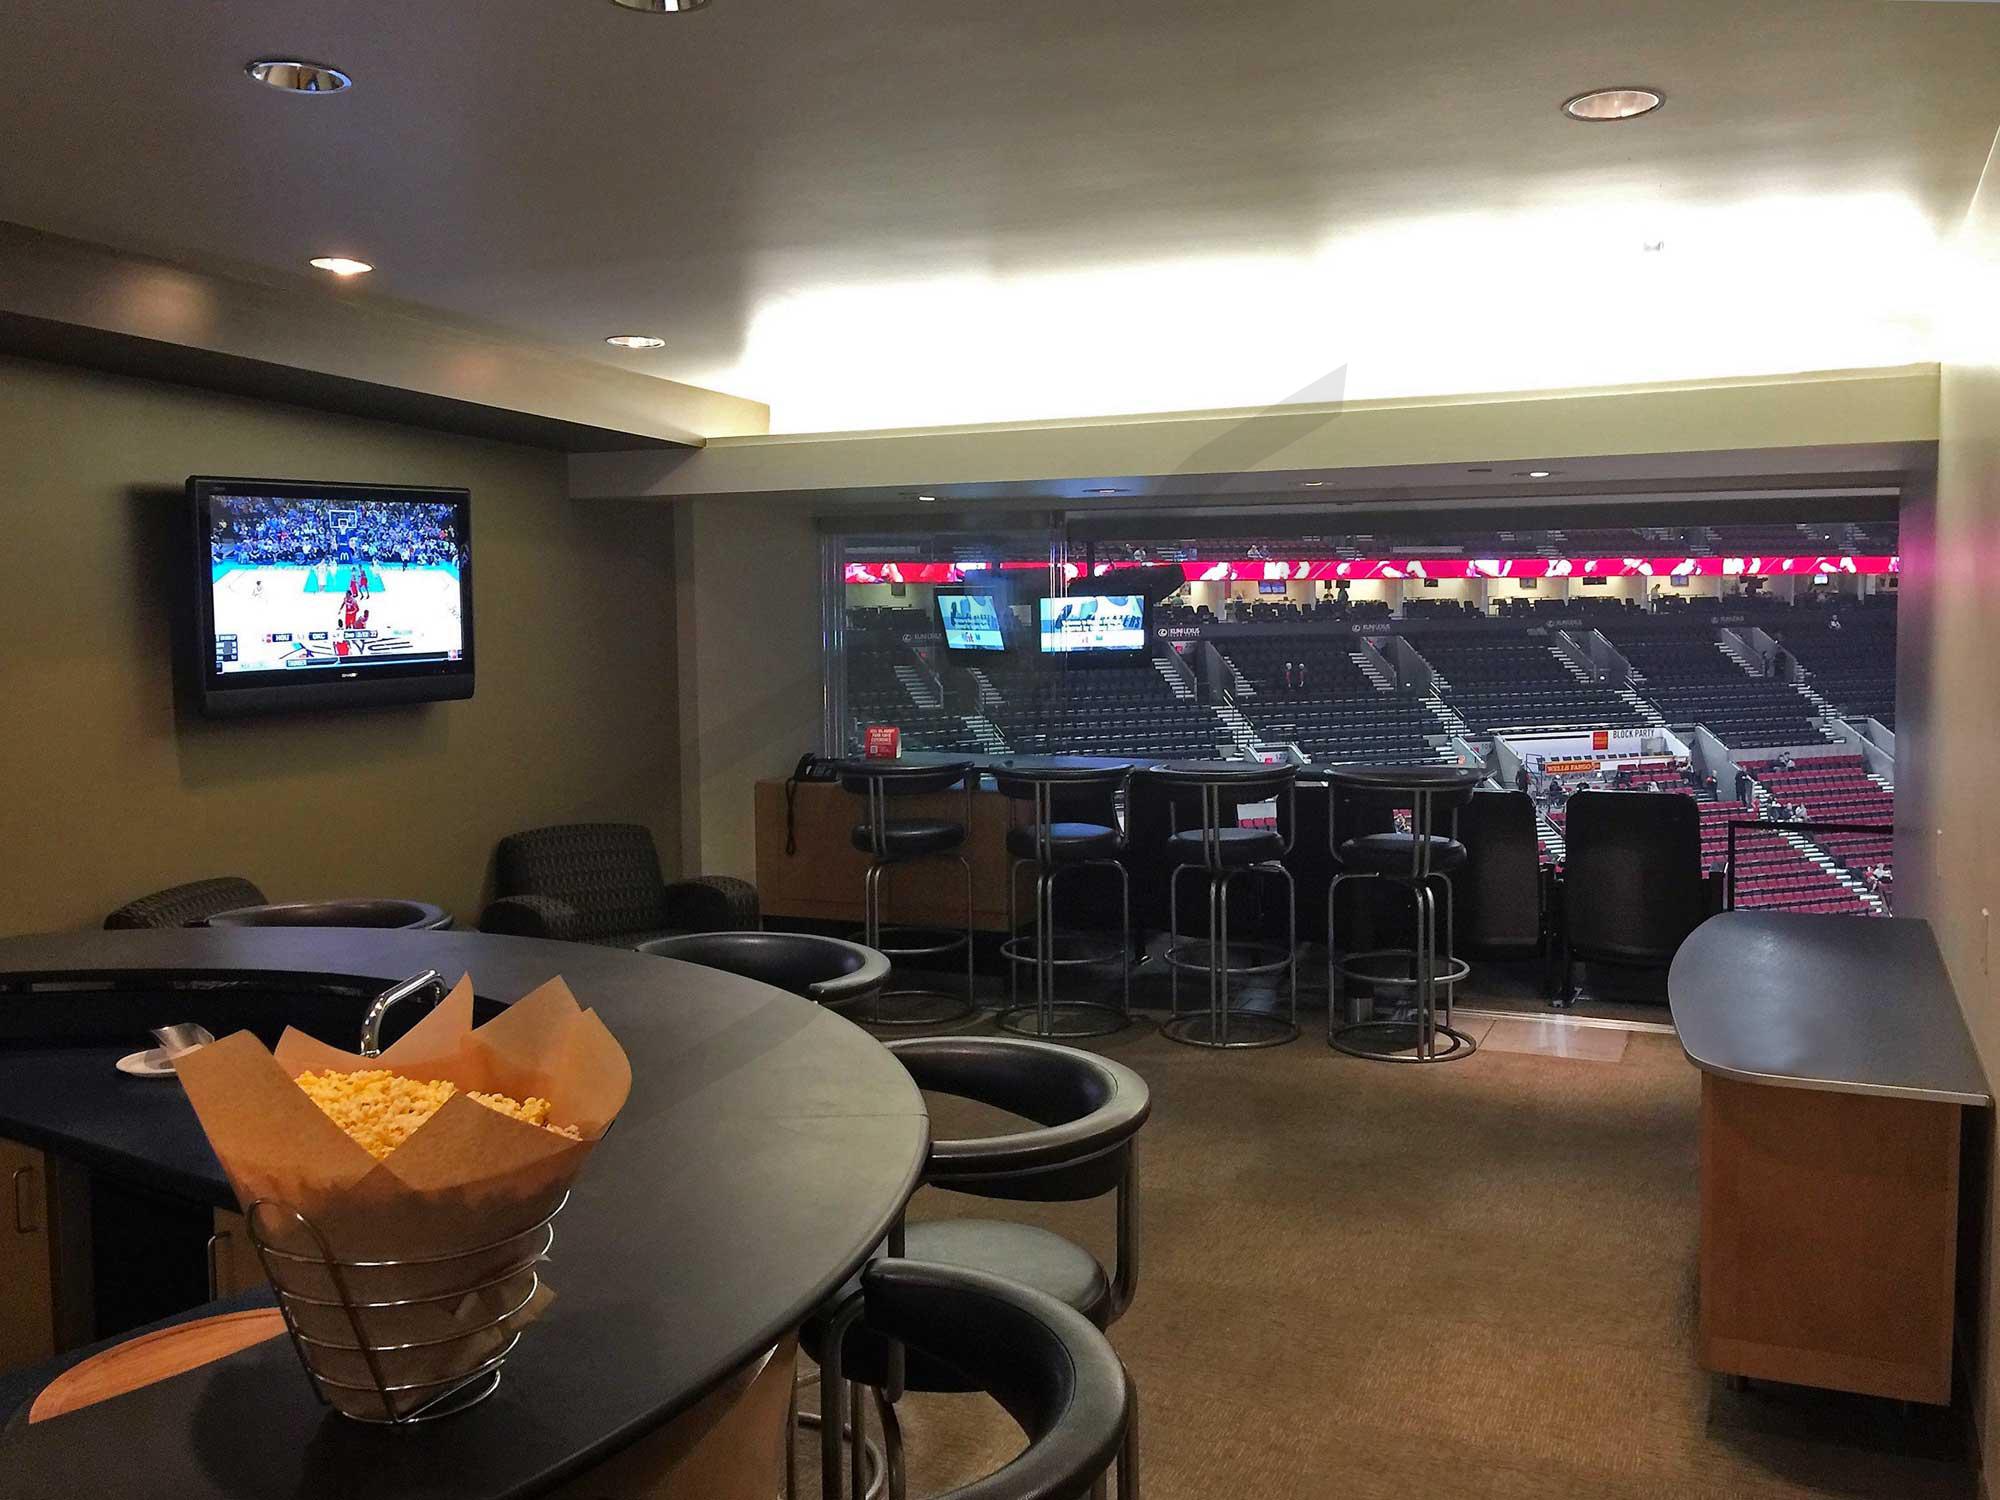 Moda Center Suite Seating Chart